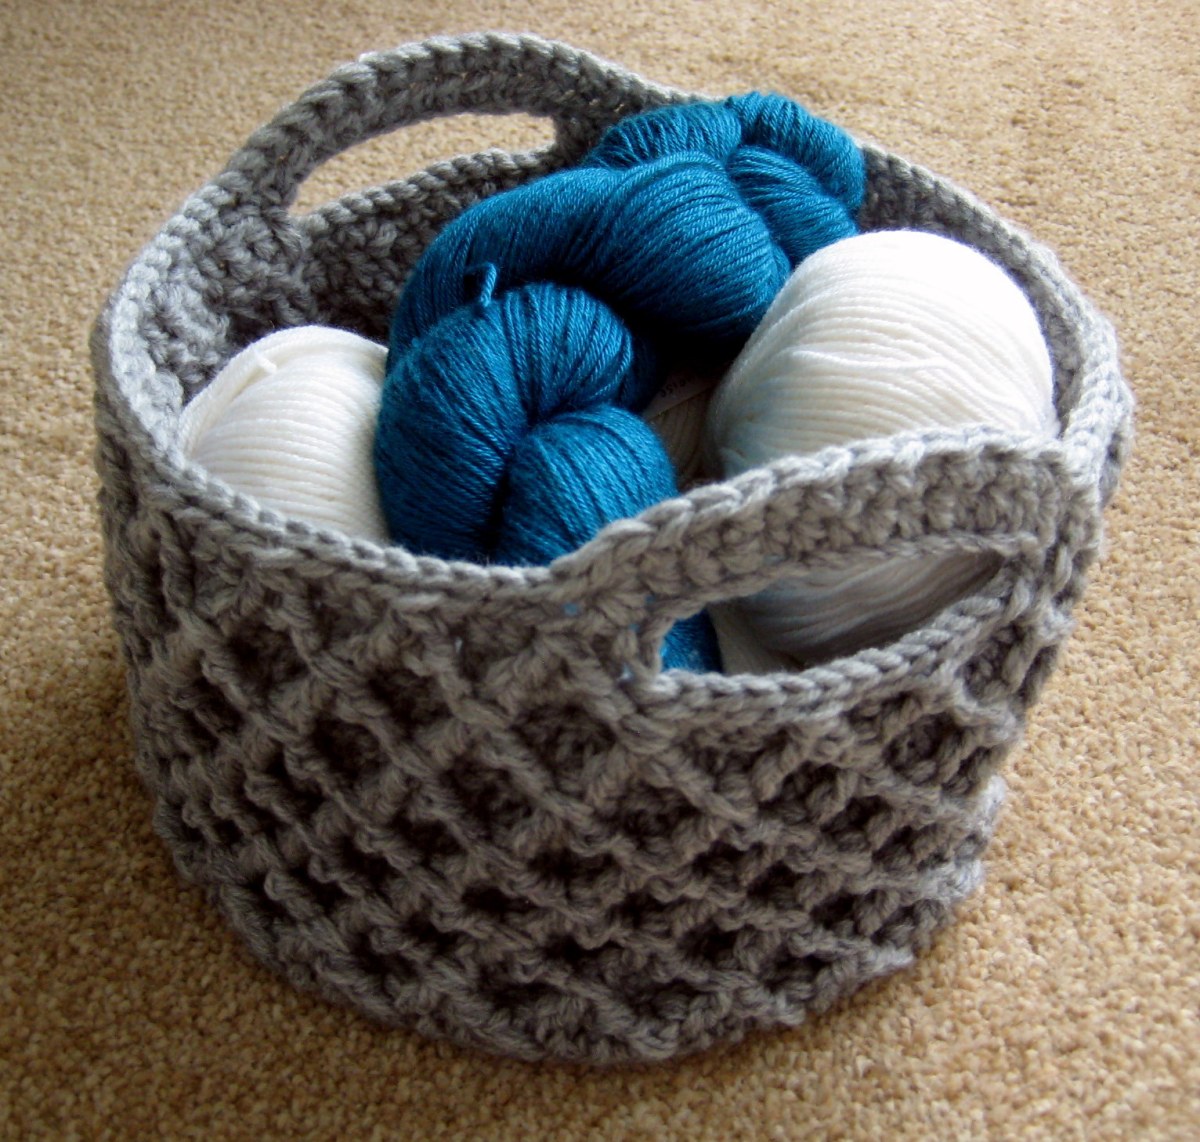 2-in-1 Crochet Storage Bucket and Bag for Yarn - Free Pattern